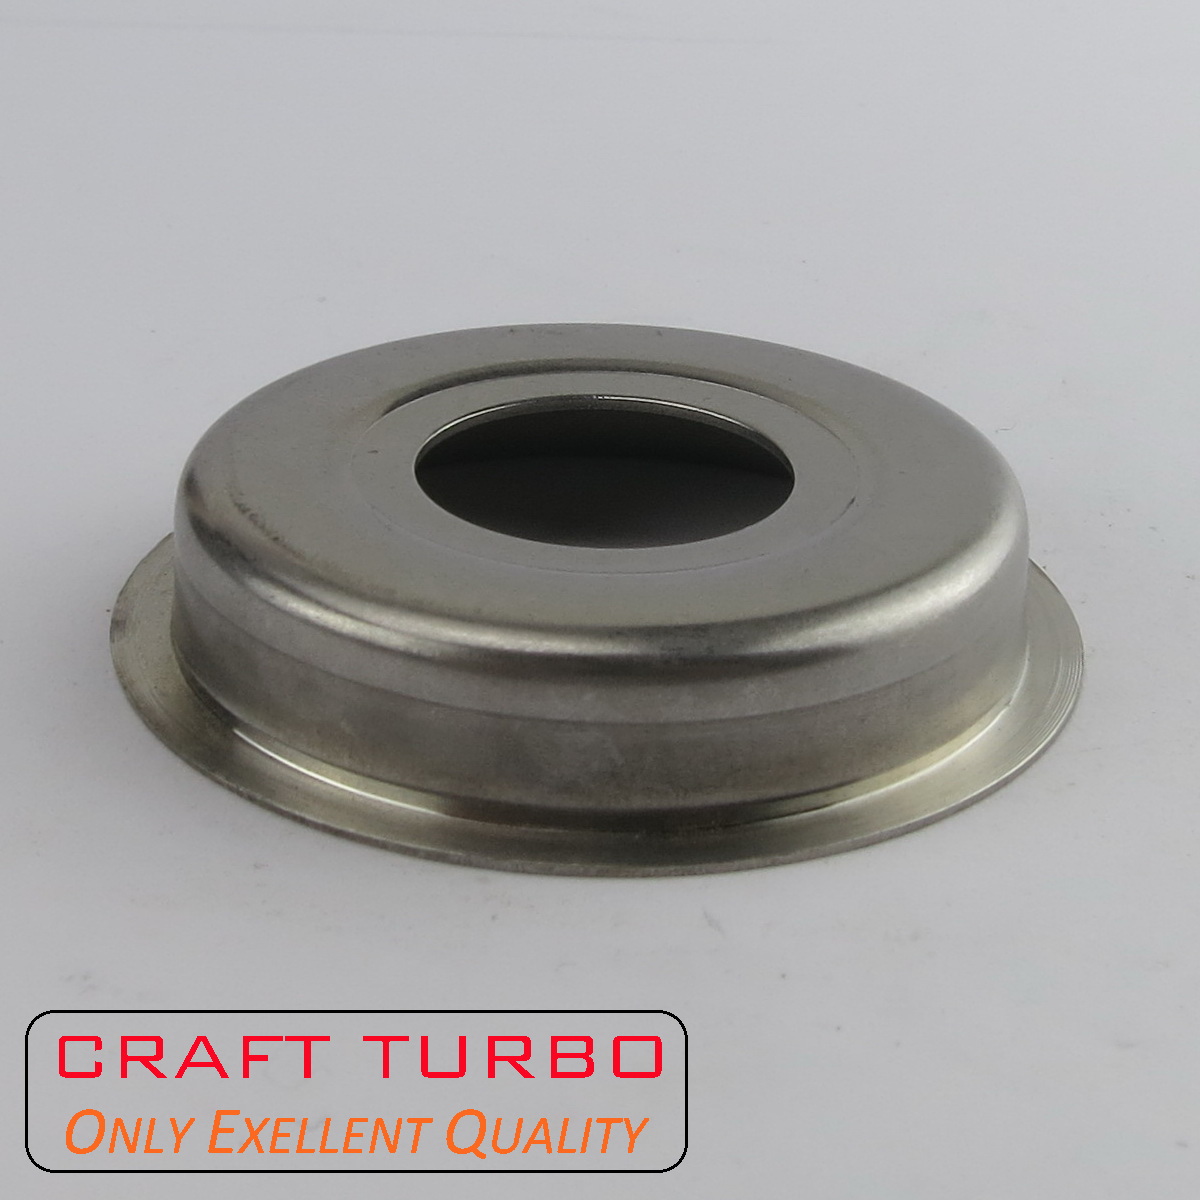 CT16 17201-30030/ 17201-30120 Heat Shield for Turbocharger 